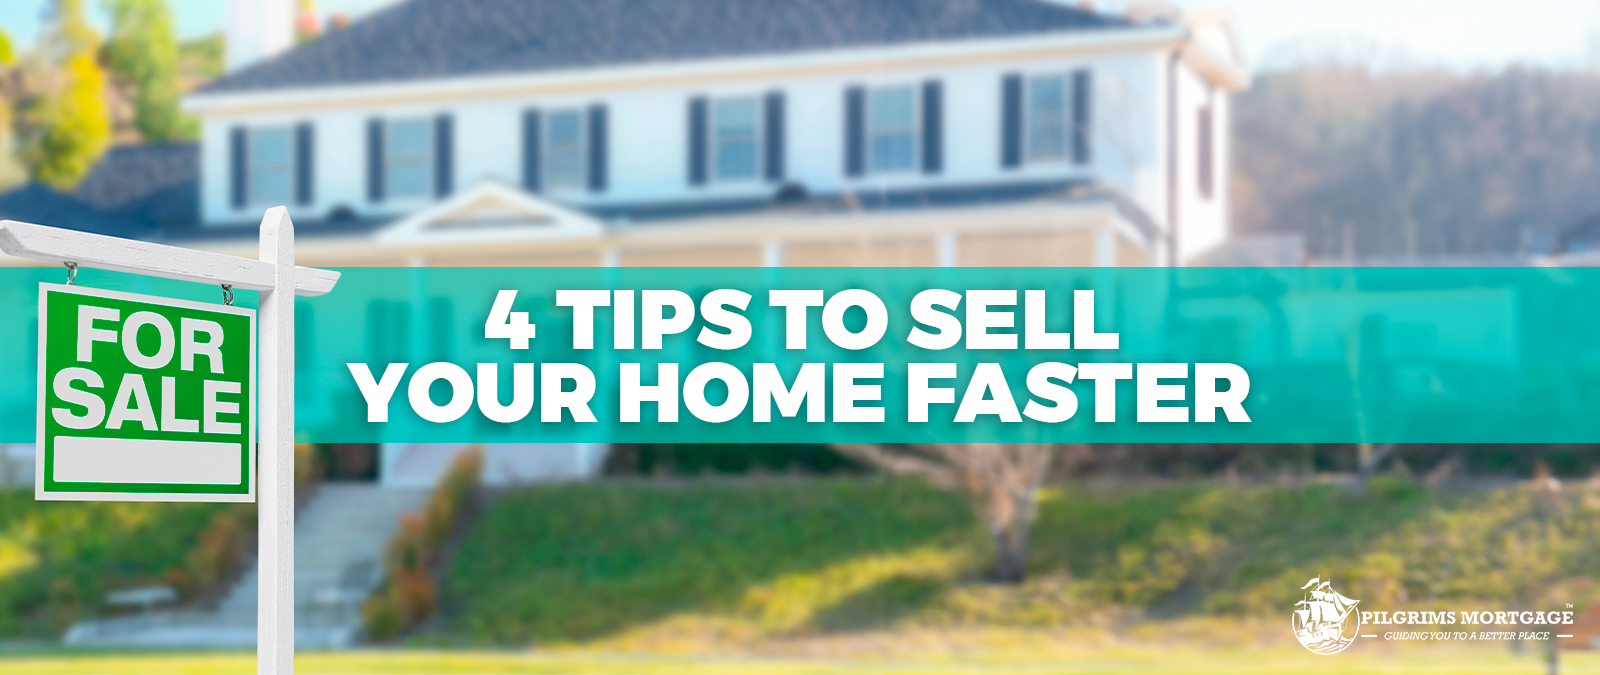 4 Tips to Sell your Home Faster